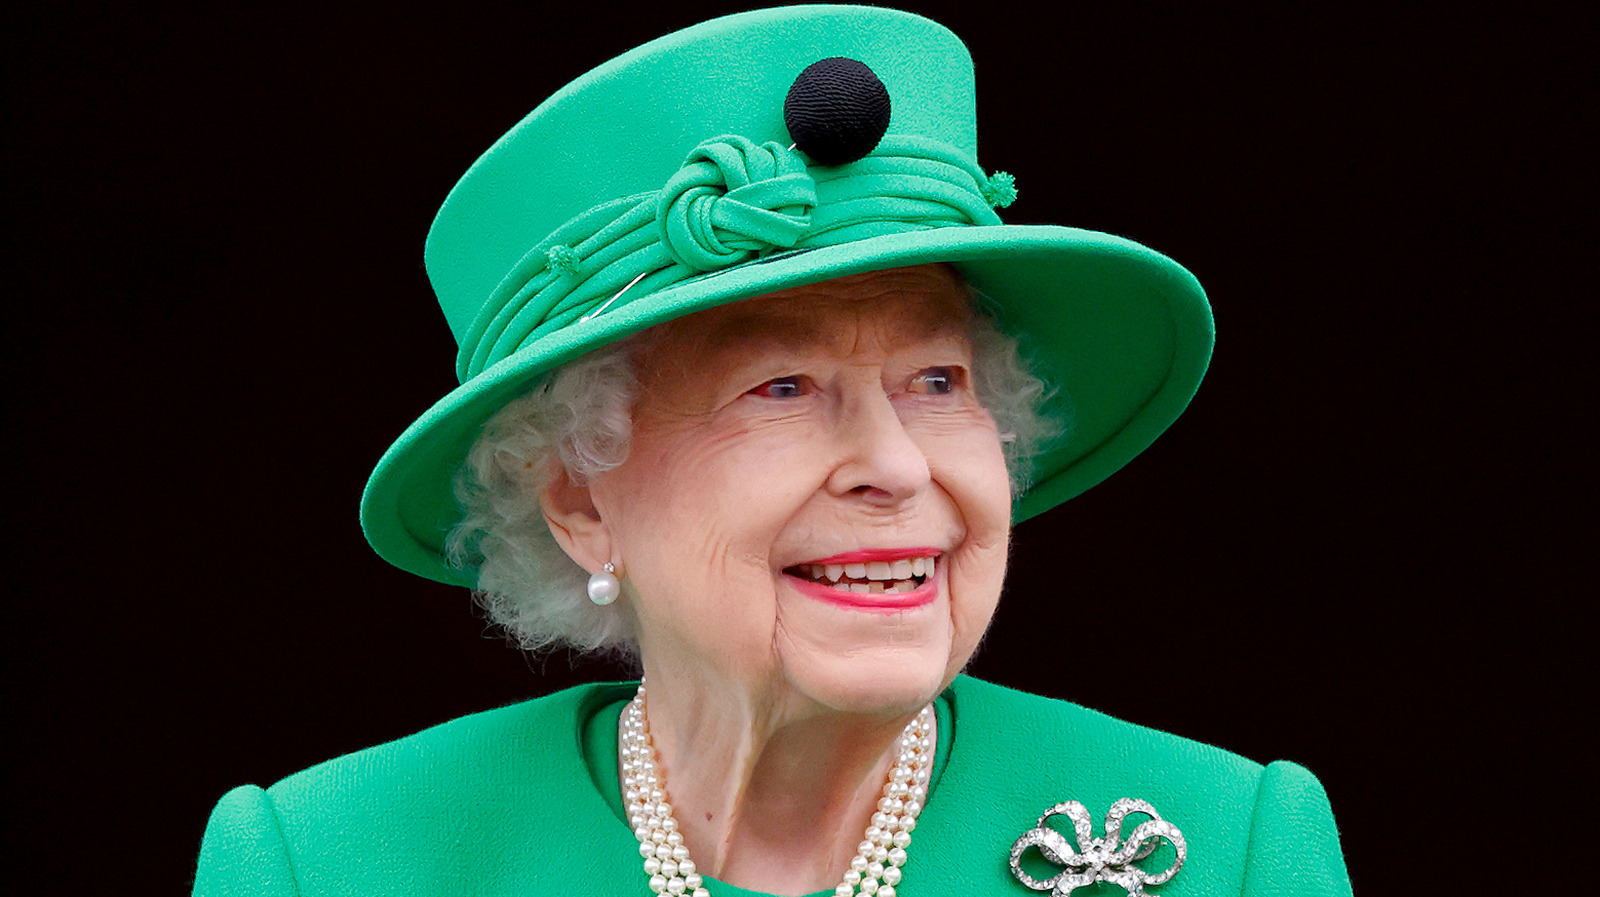 The Little-Known Health Benefit Of Queen Elizabeth's Notorious Egg Order - Health Digest